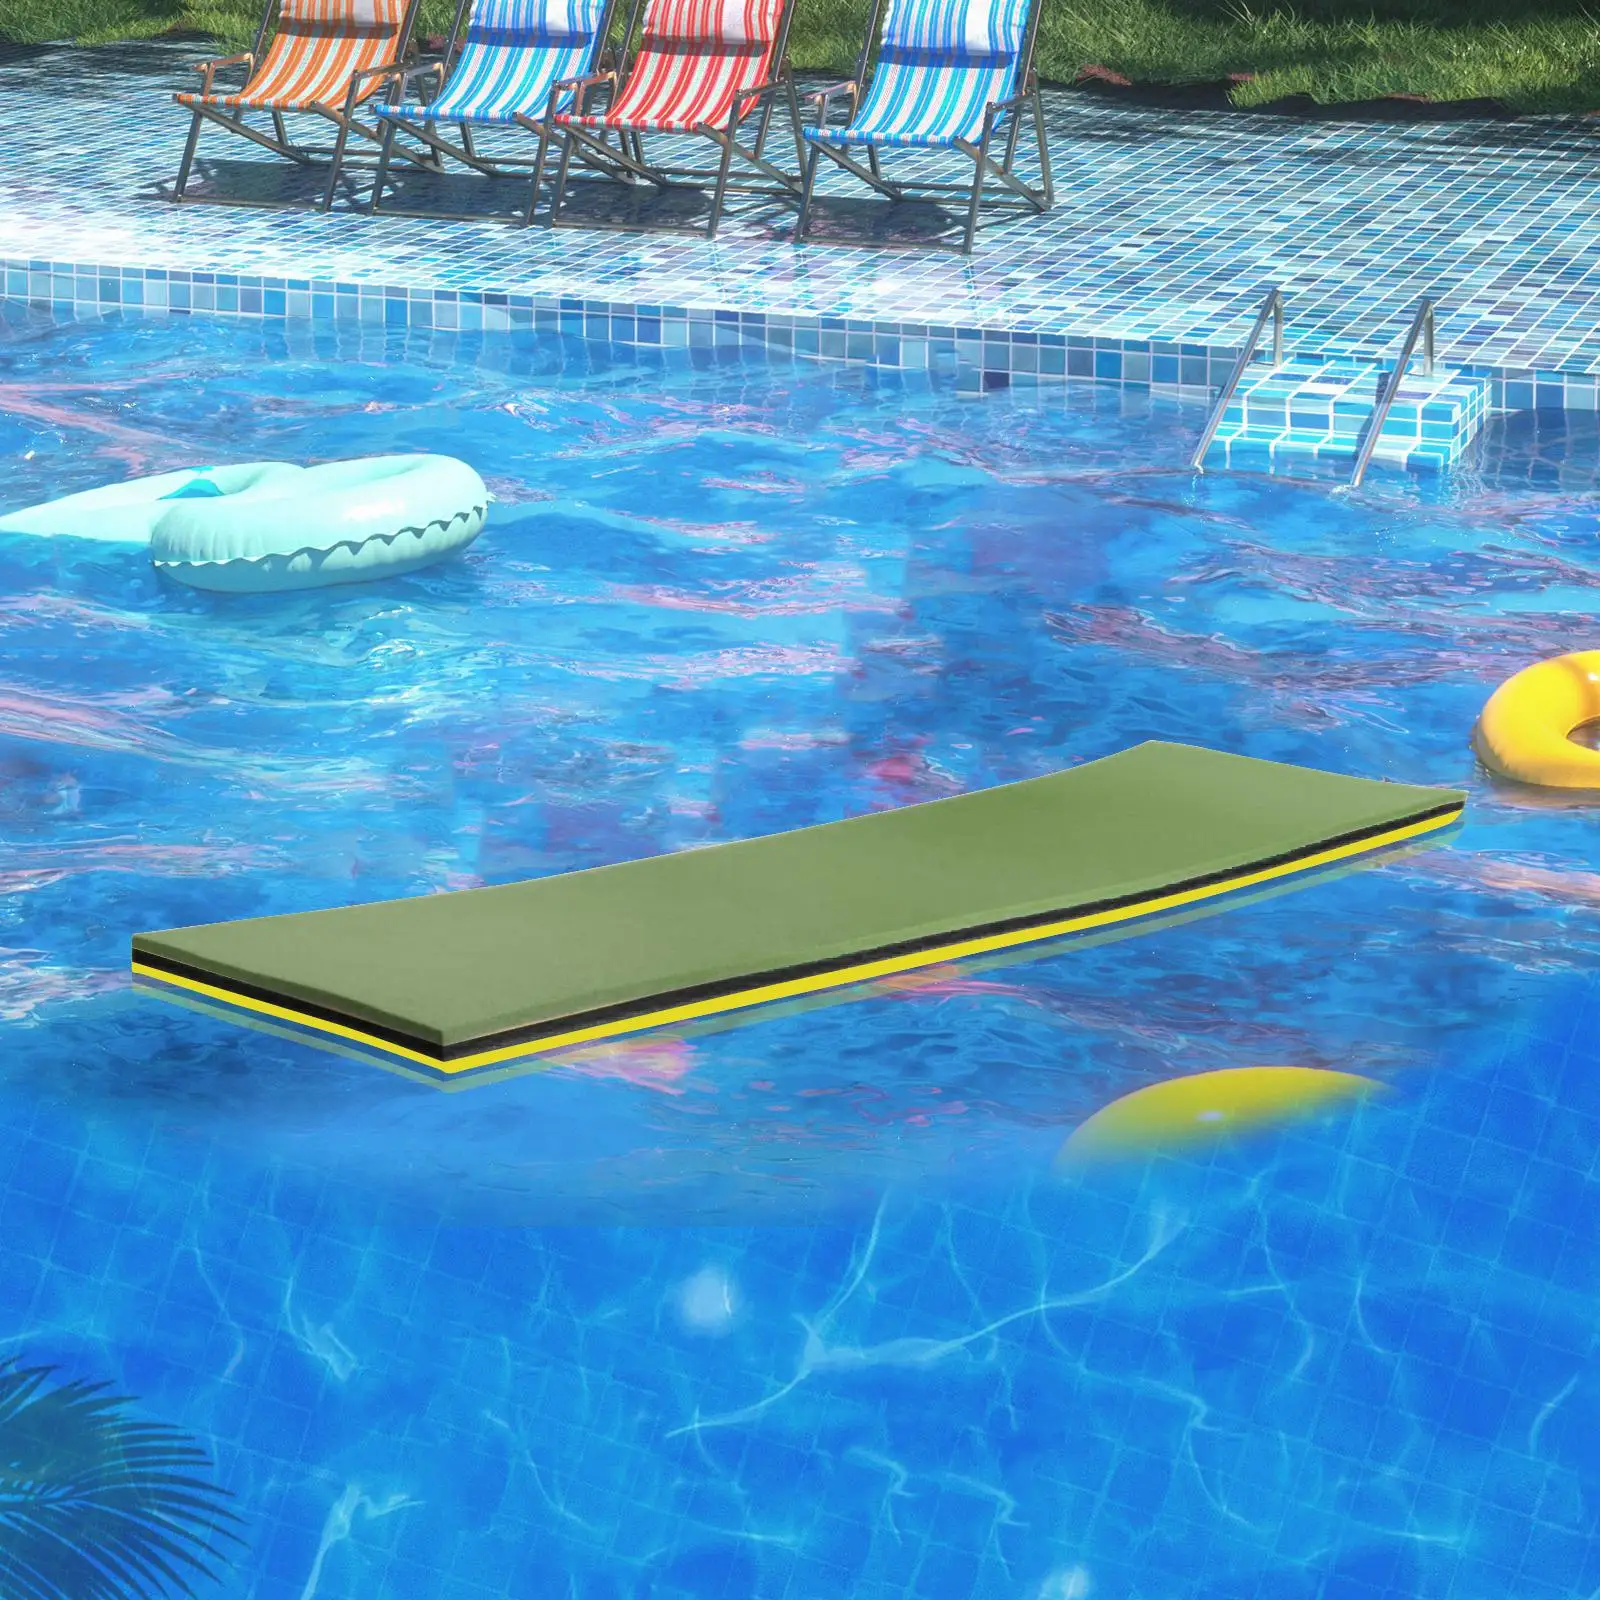 Pool Floating Water Mat Water Raft 43x15.7x1.3inch for Kids, Teens Durable Lightweight Roll up Pad Yellow Black Green